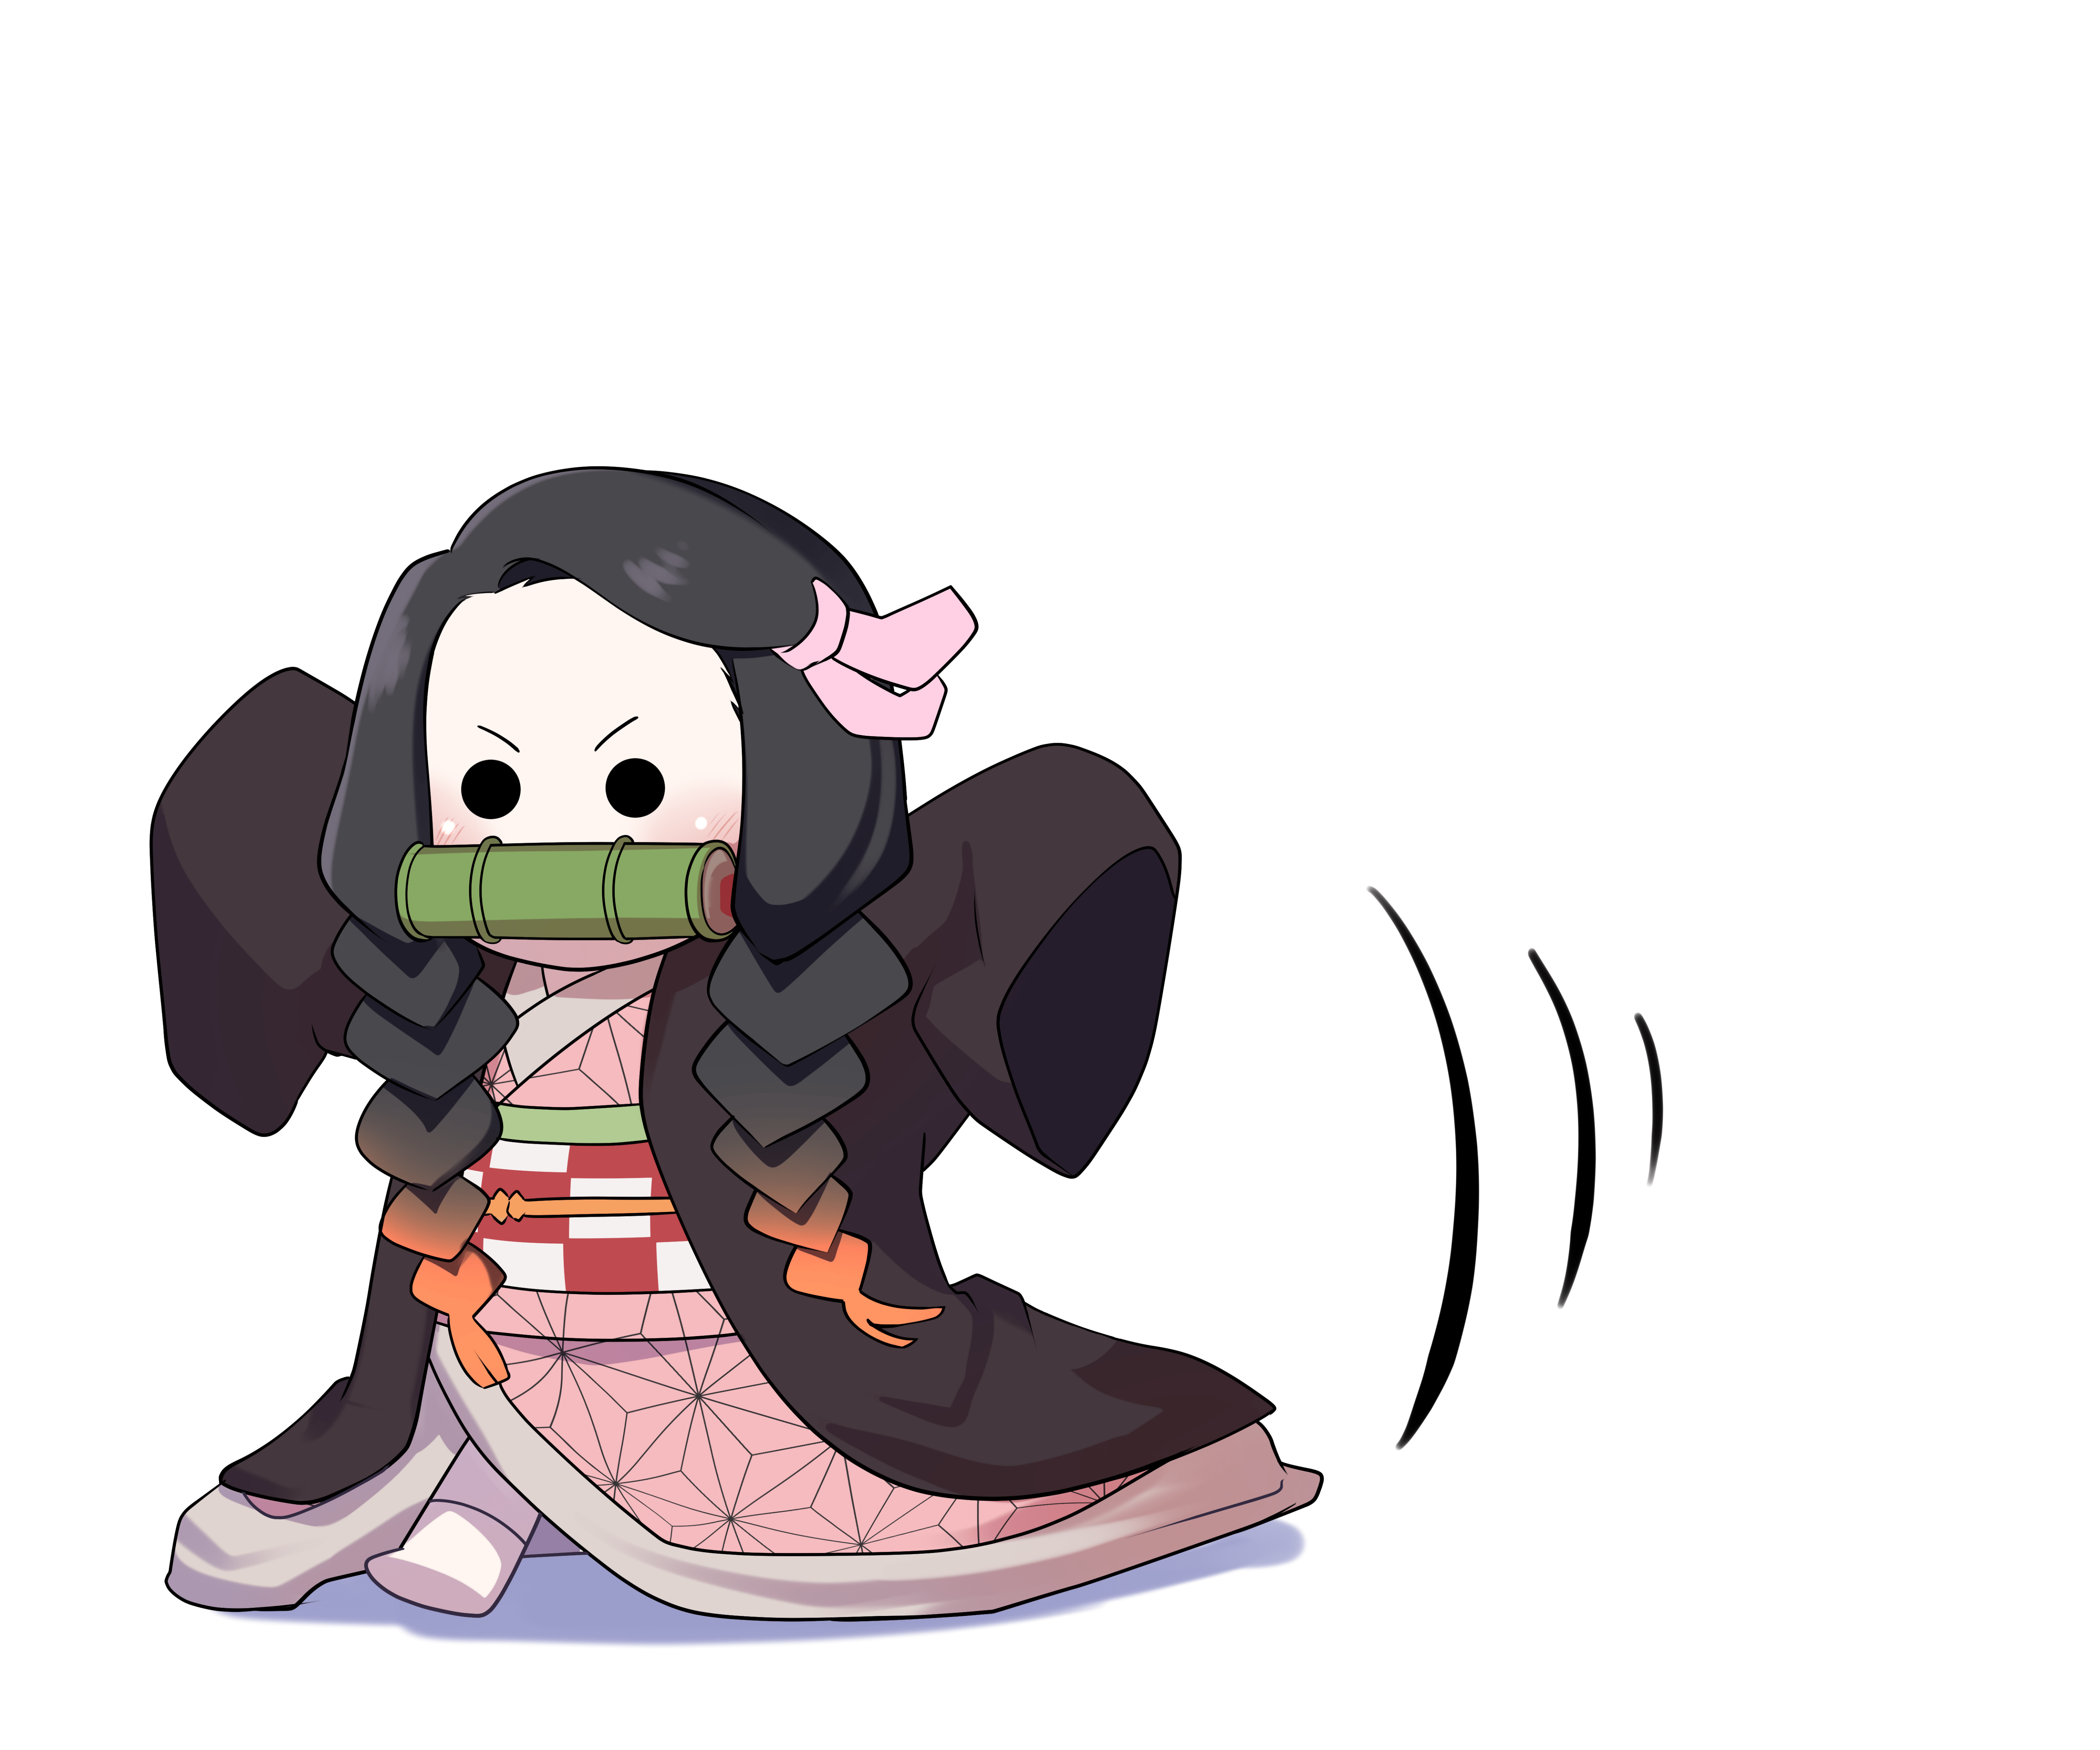 A chibi Nezuko from Demon Slayer with her mouth covered by a green scroll. - Nezuko